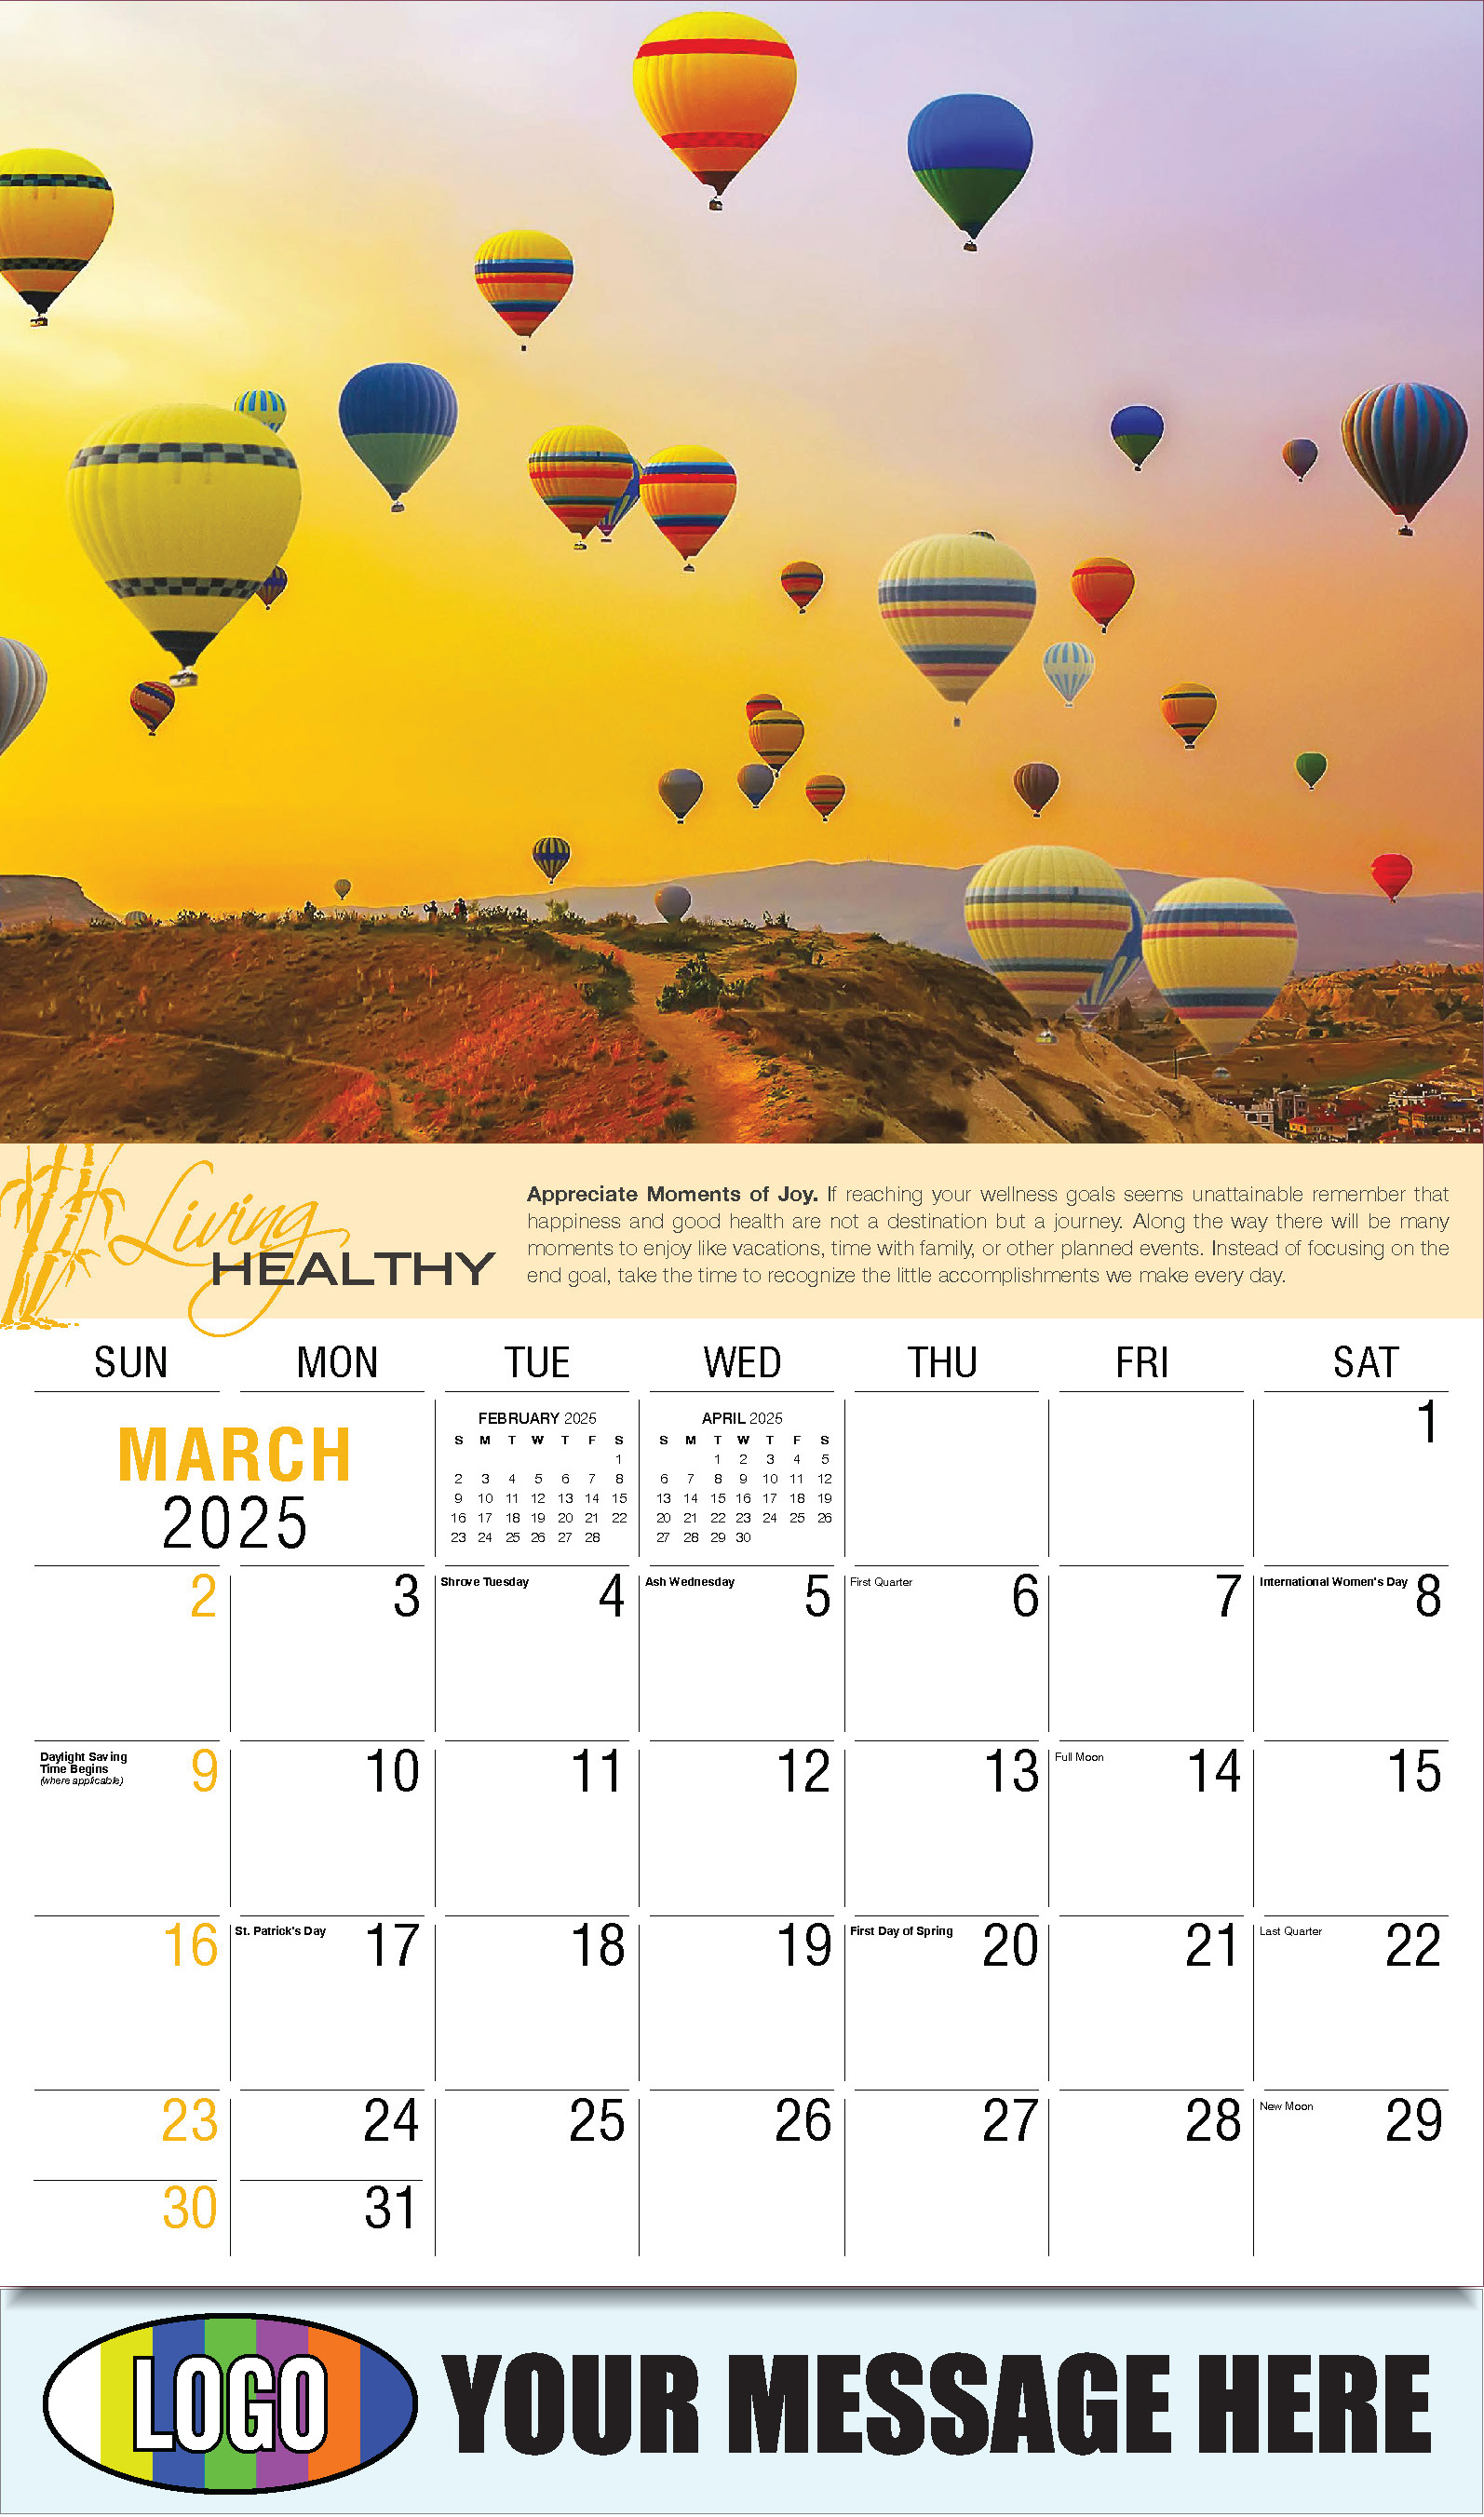 Living Healthy 2025 Business Promotional Calendar - March